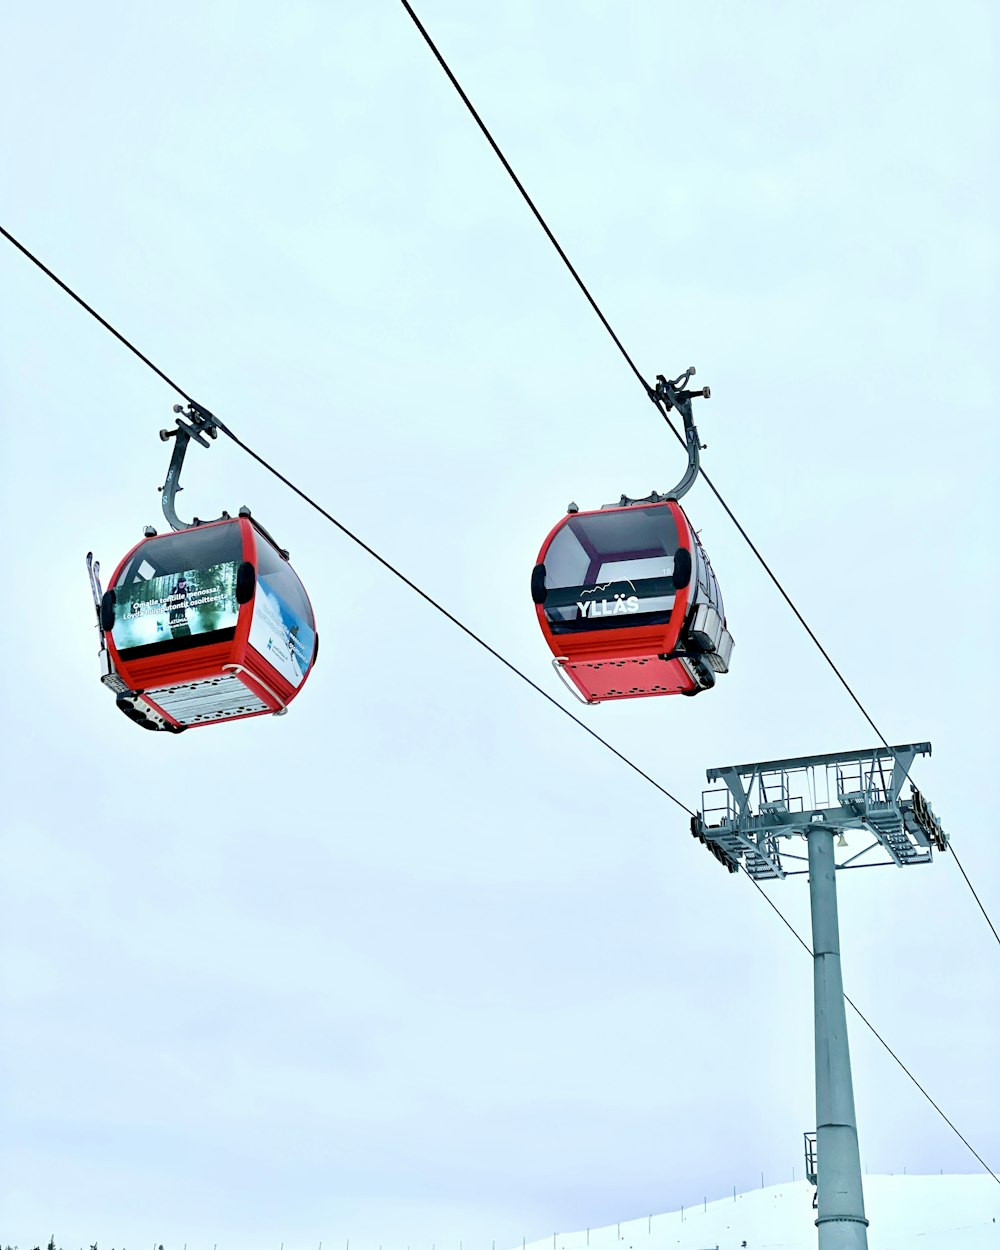 a ski lift with two people on it